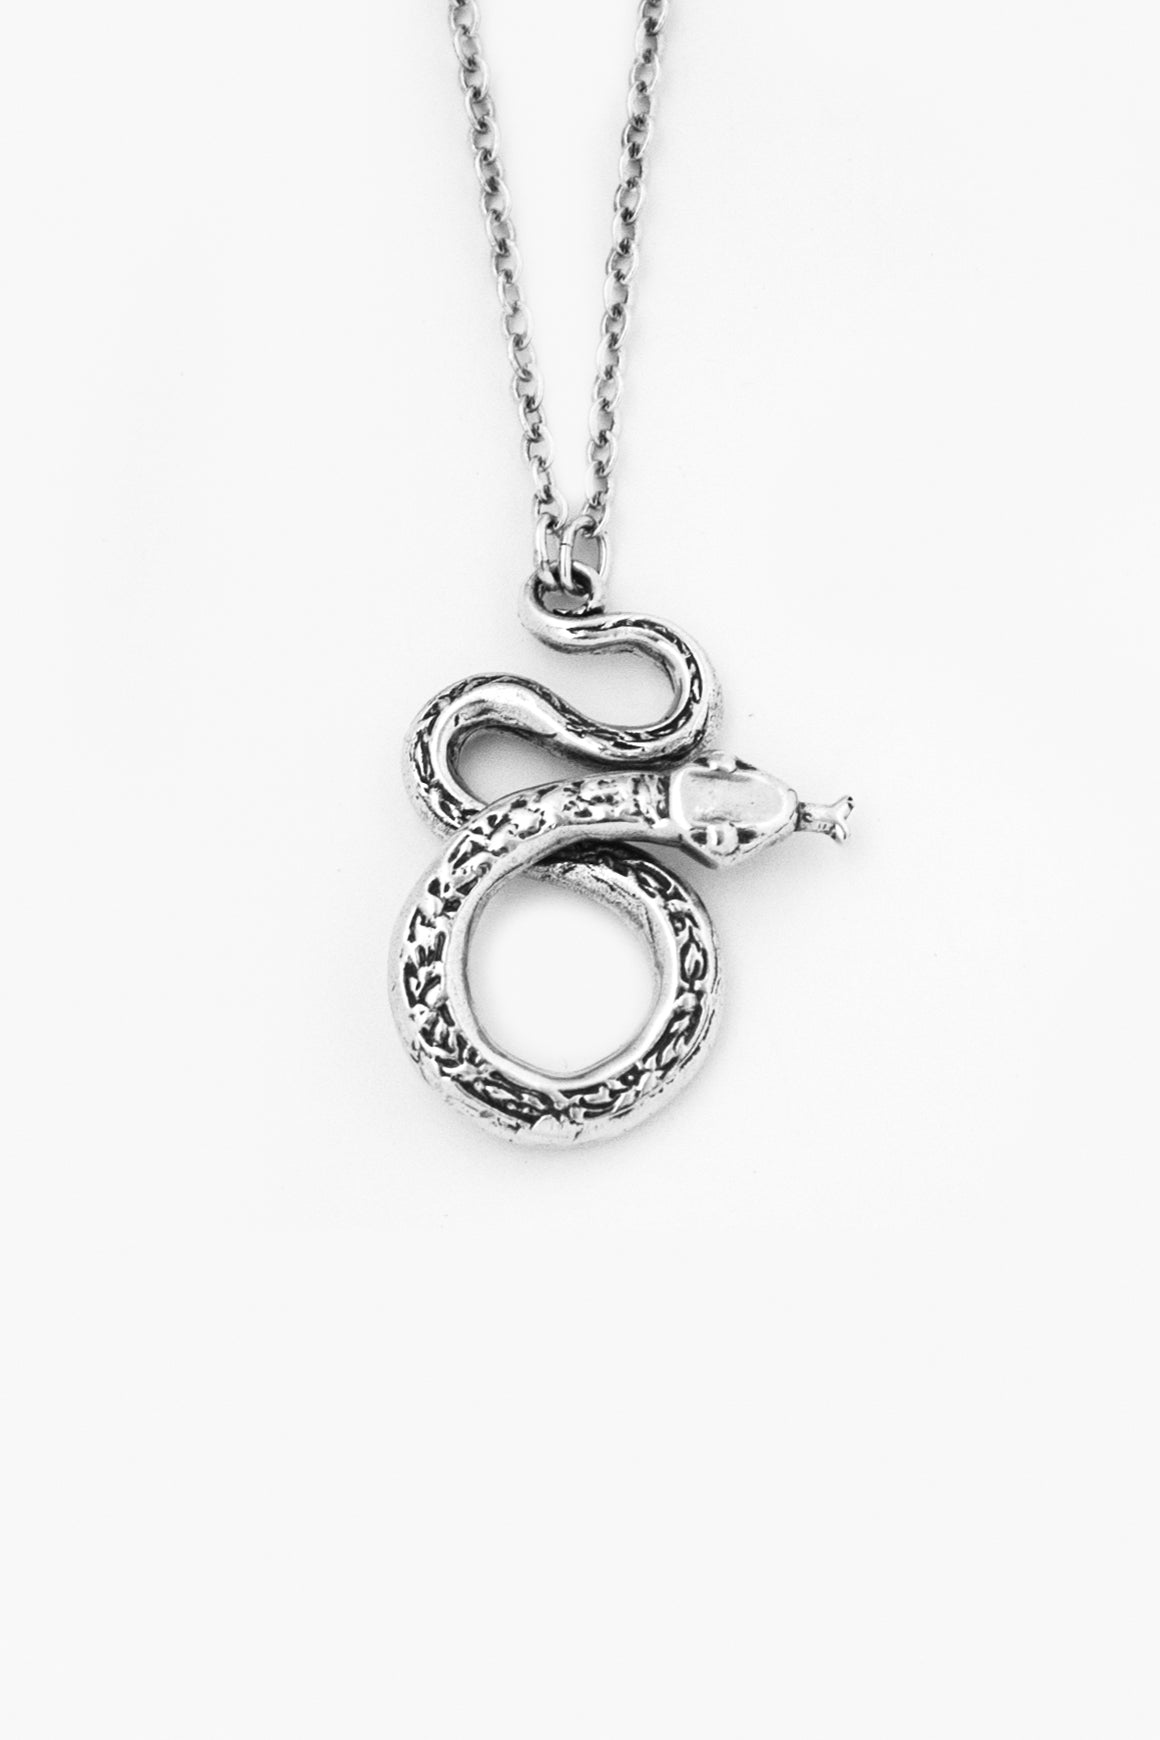 Snake Sterling Silver Necklace - Silver Spoon Jewelry